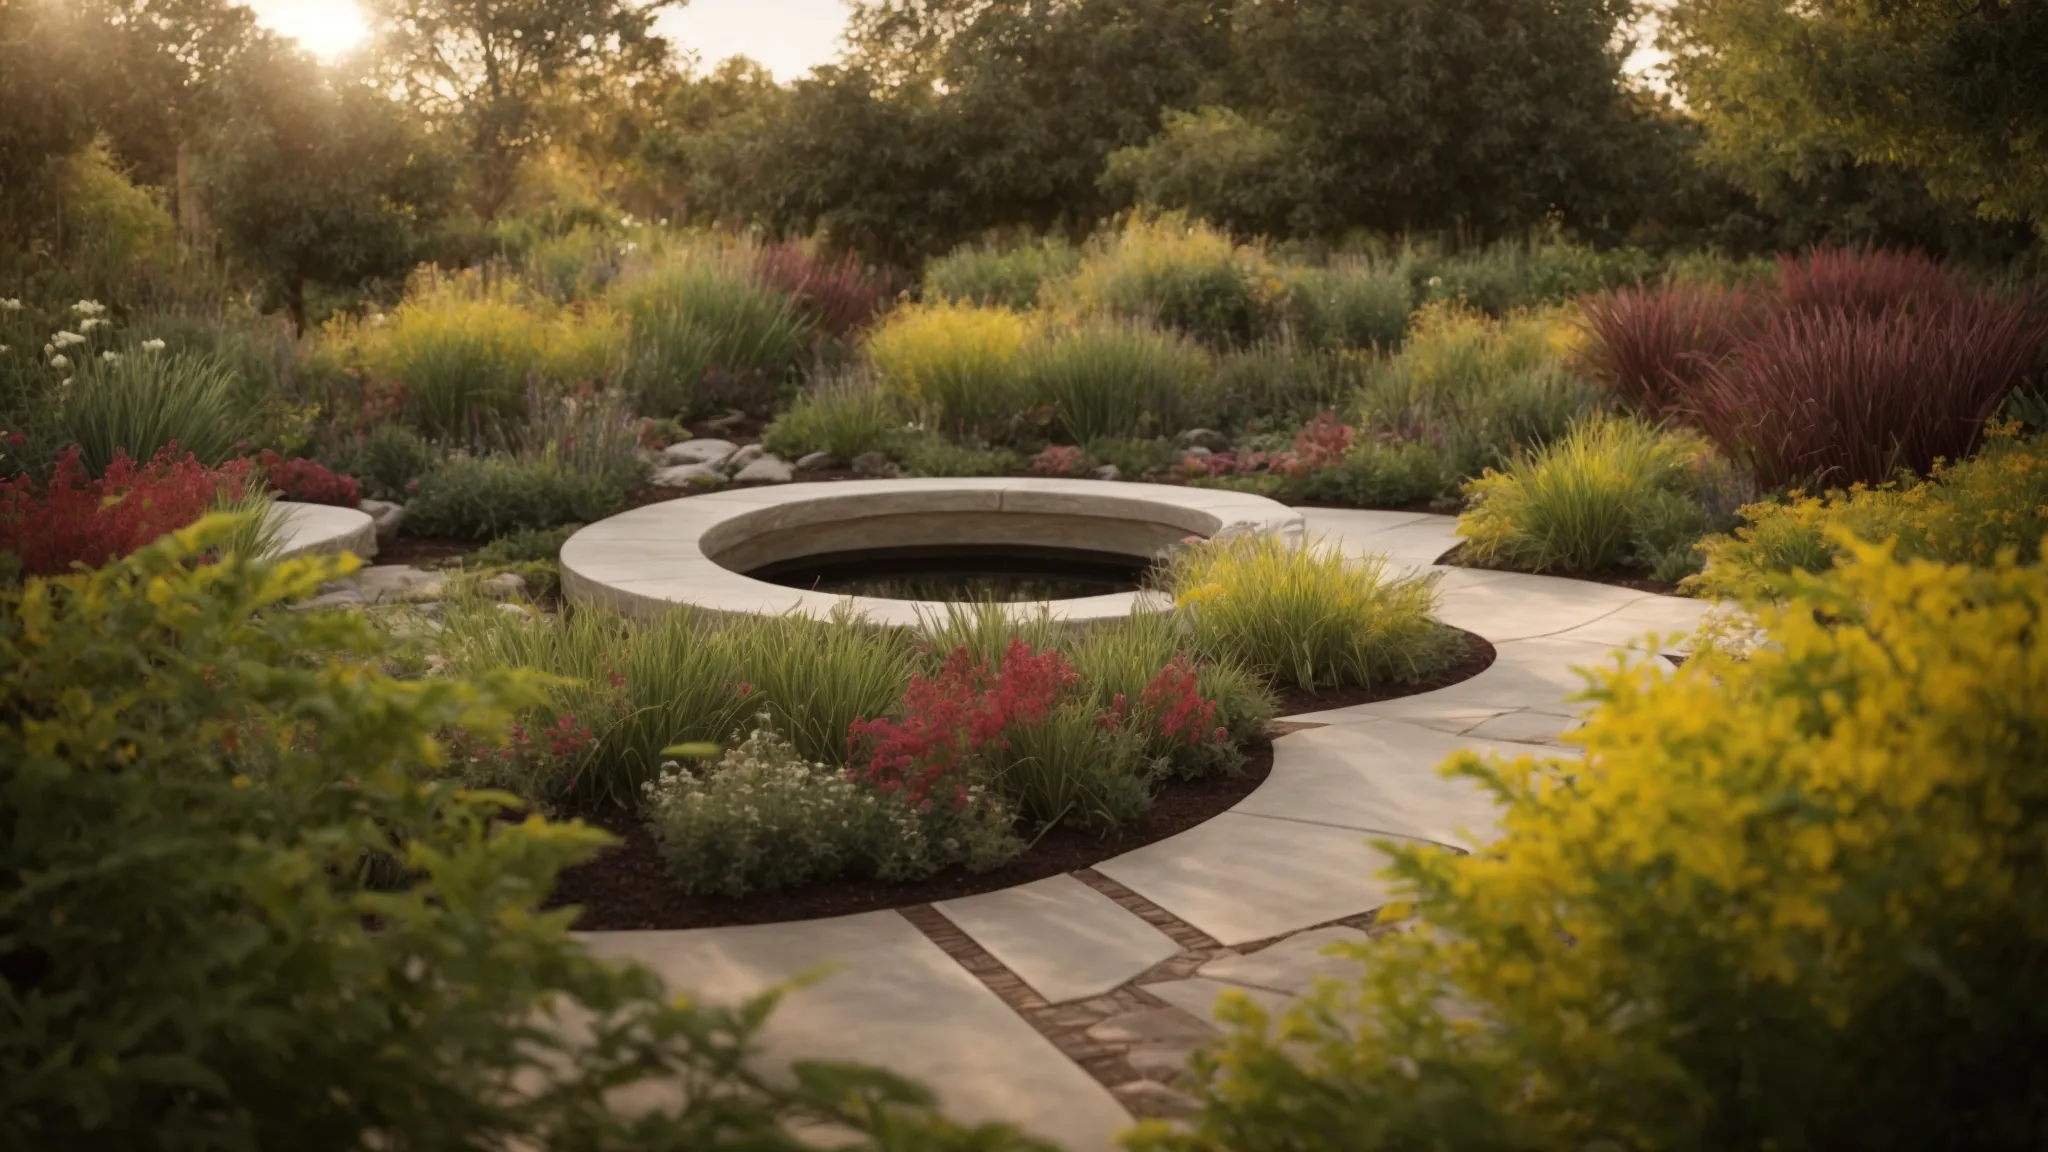 Create an image capturing a serene garden scene with vibrant native plants, a rainwater collection system, and a solar-powered lighting system. Showcase a harmonious blend of natural elements and sustainable practices in landscape design.